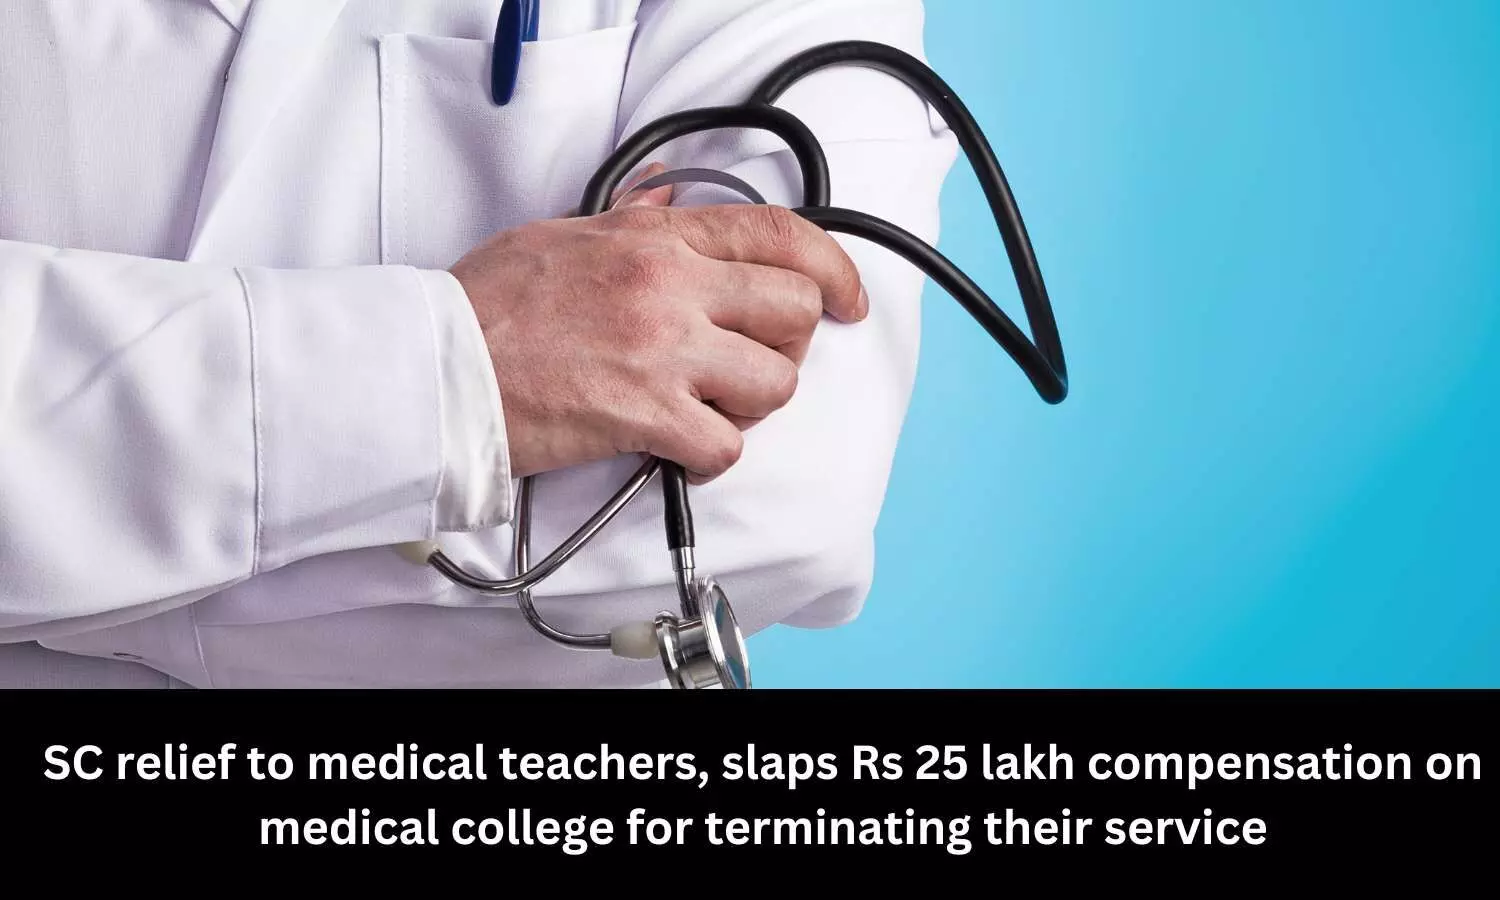 SC relief to medical teachers, slaps Rs 25 lakh compensation on medical college for terminating their service